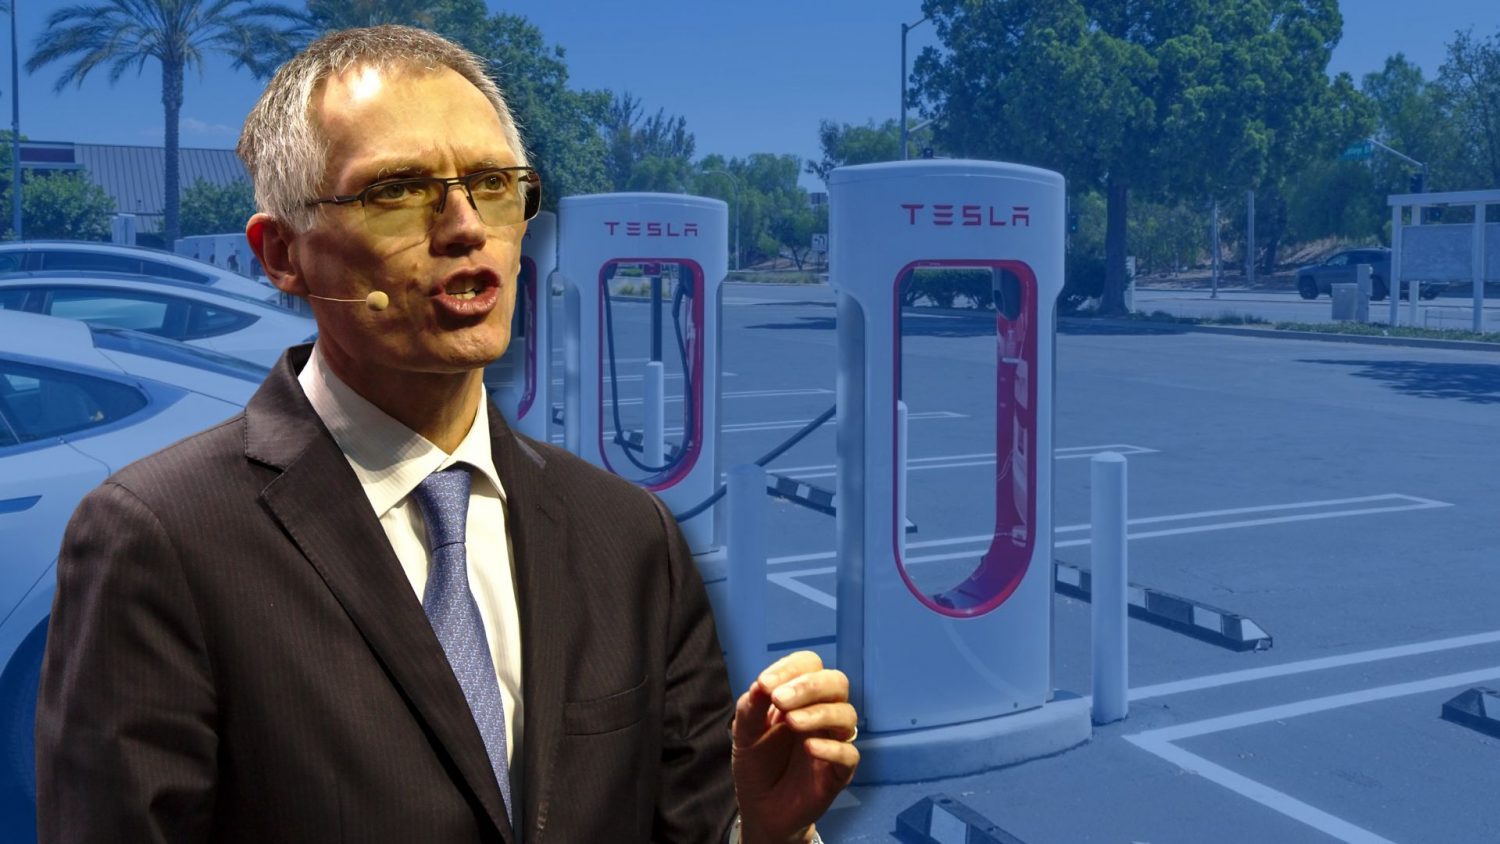 Stellantis will adopt Tesla's NACS in future EVs but has yet to clarify whether drivers will have access to the Supercharger network.